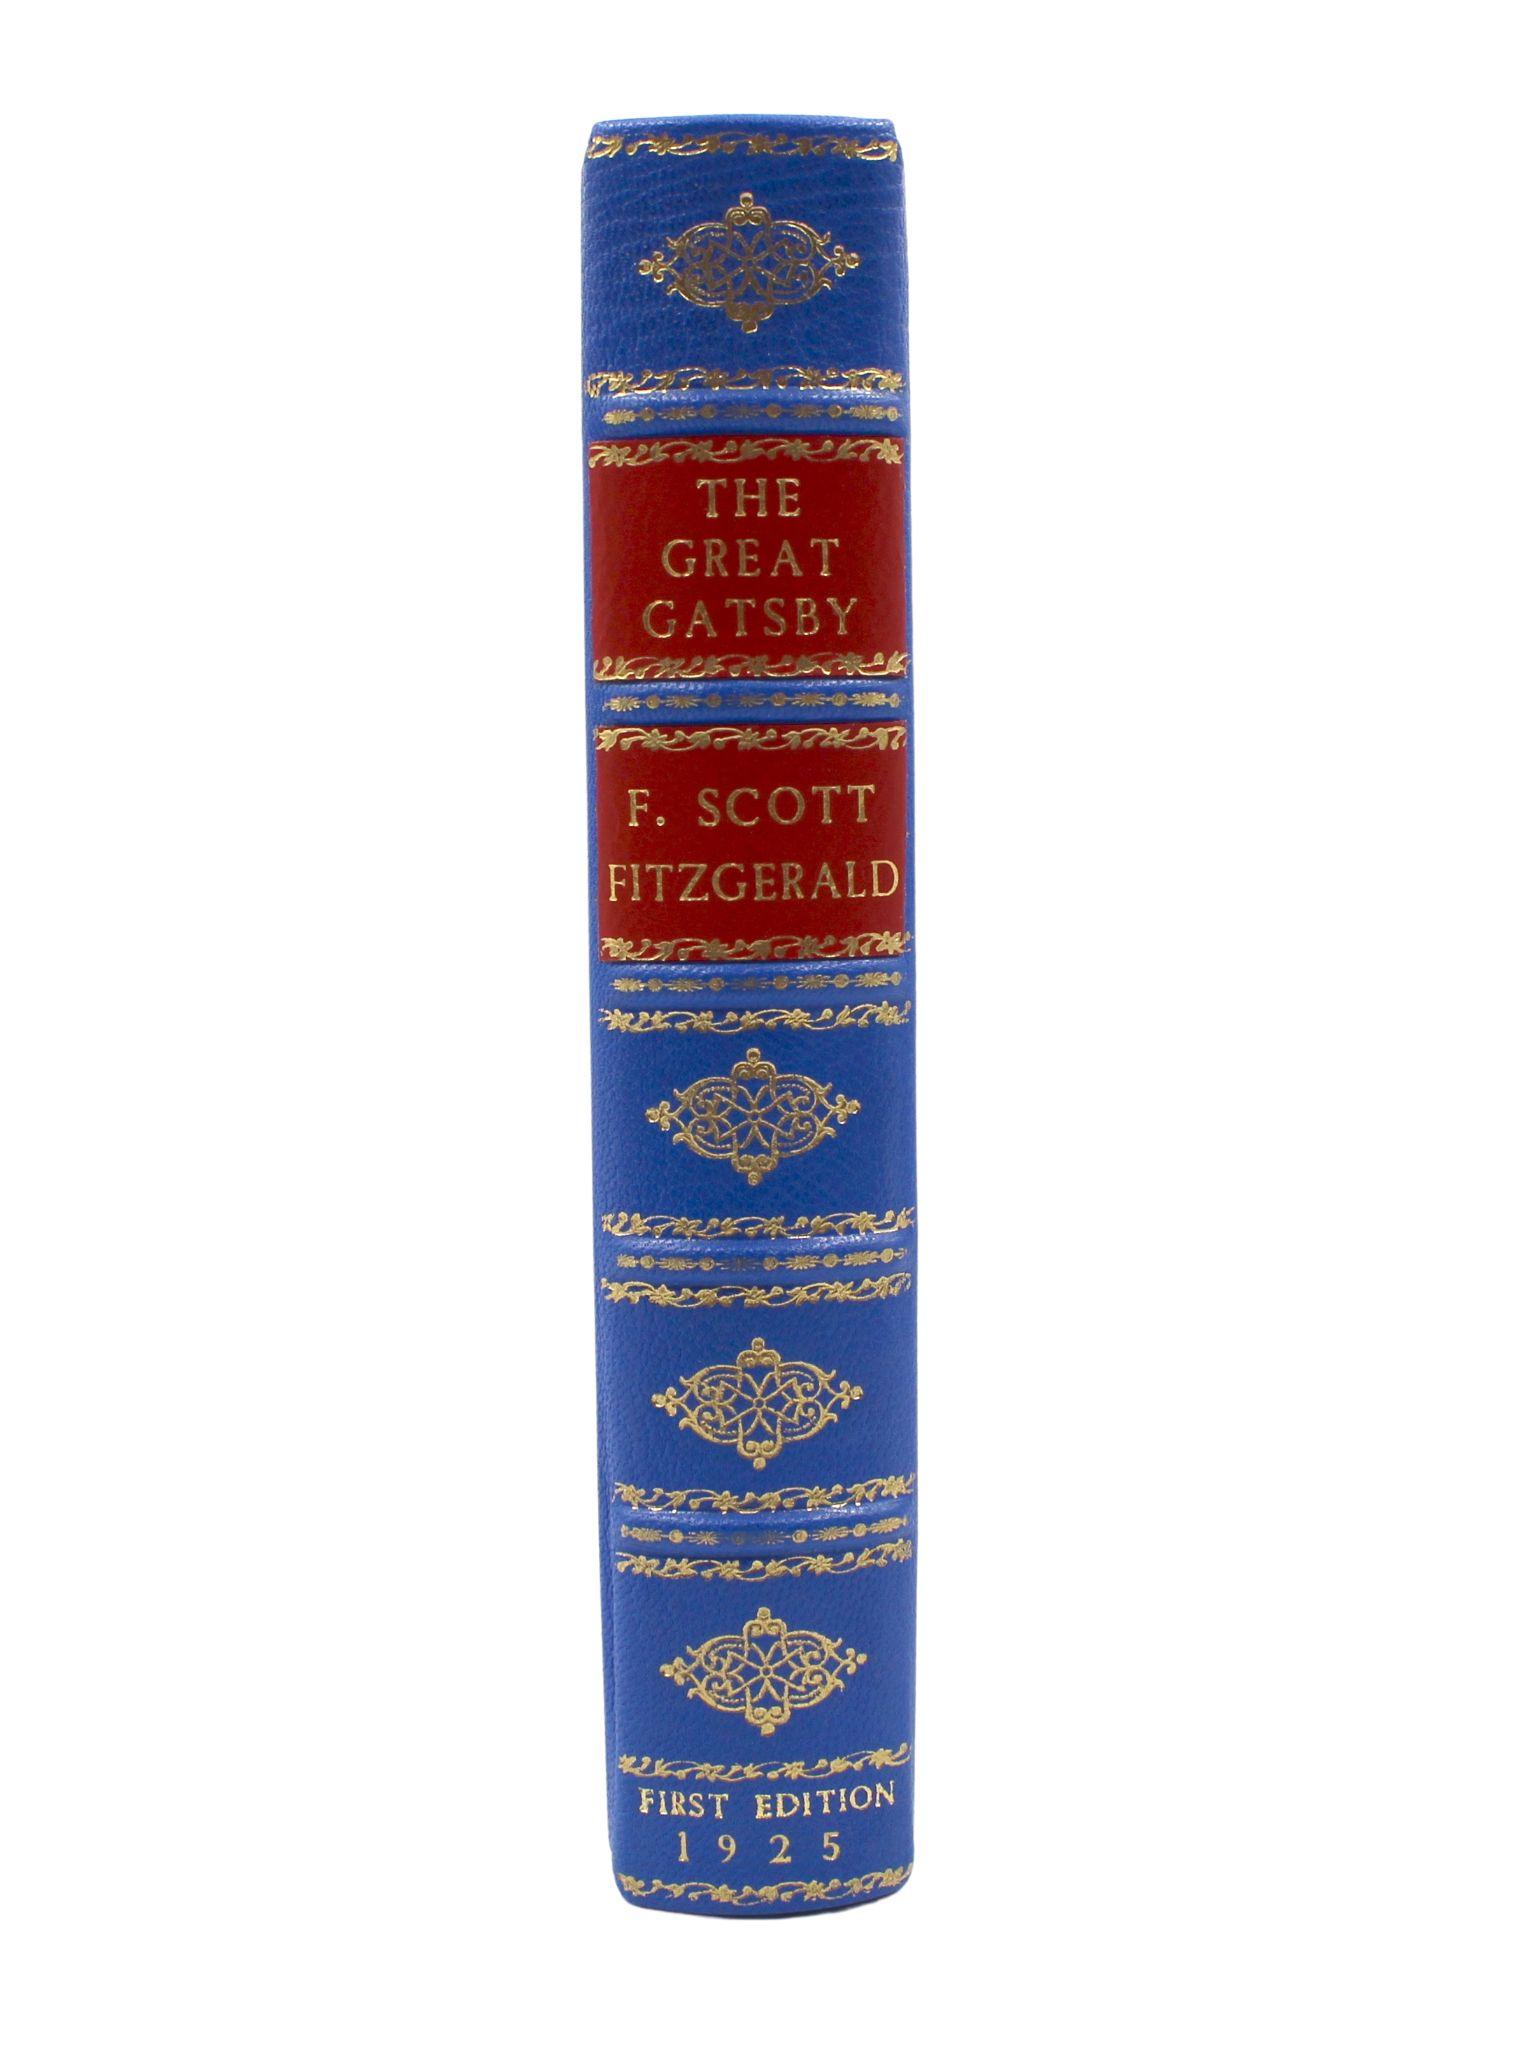 Embossed The Great Gatsby by F. Scott Fitzgerald, First Edition, First Issue, 1925